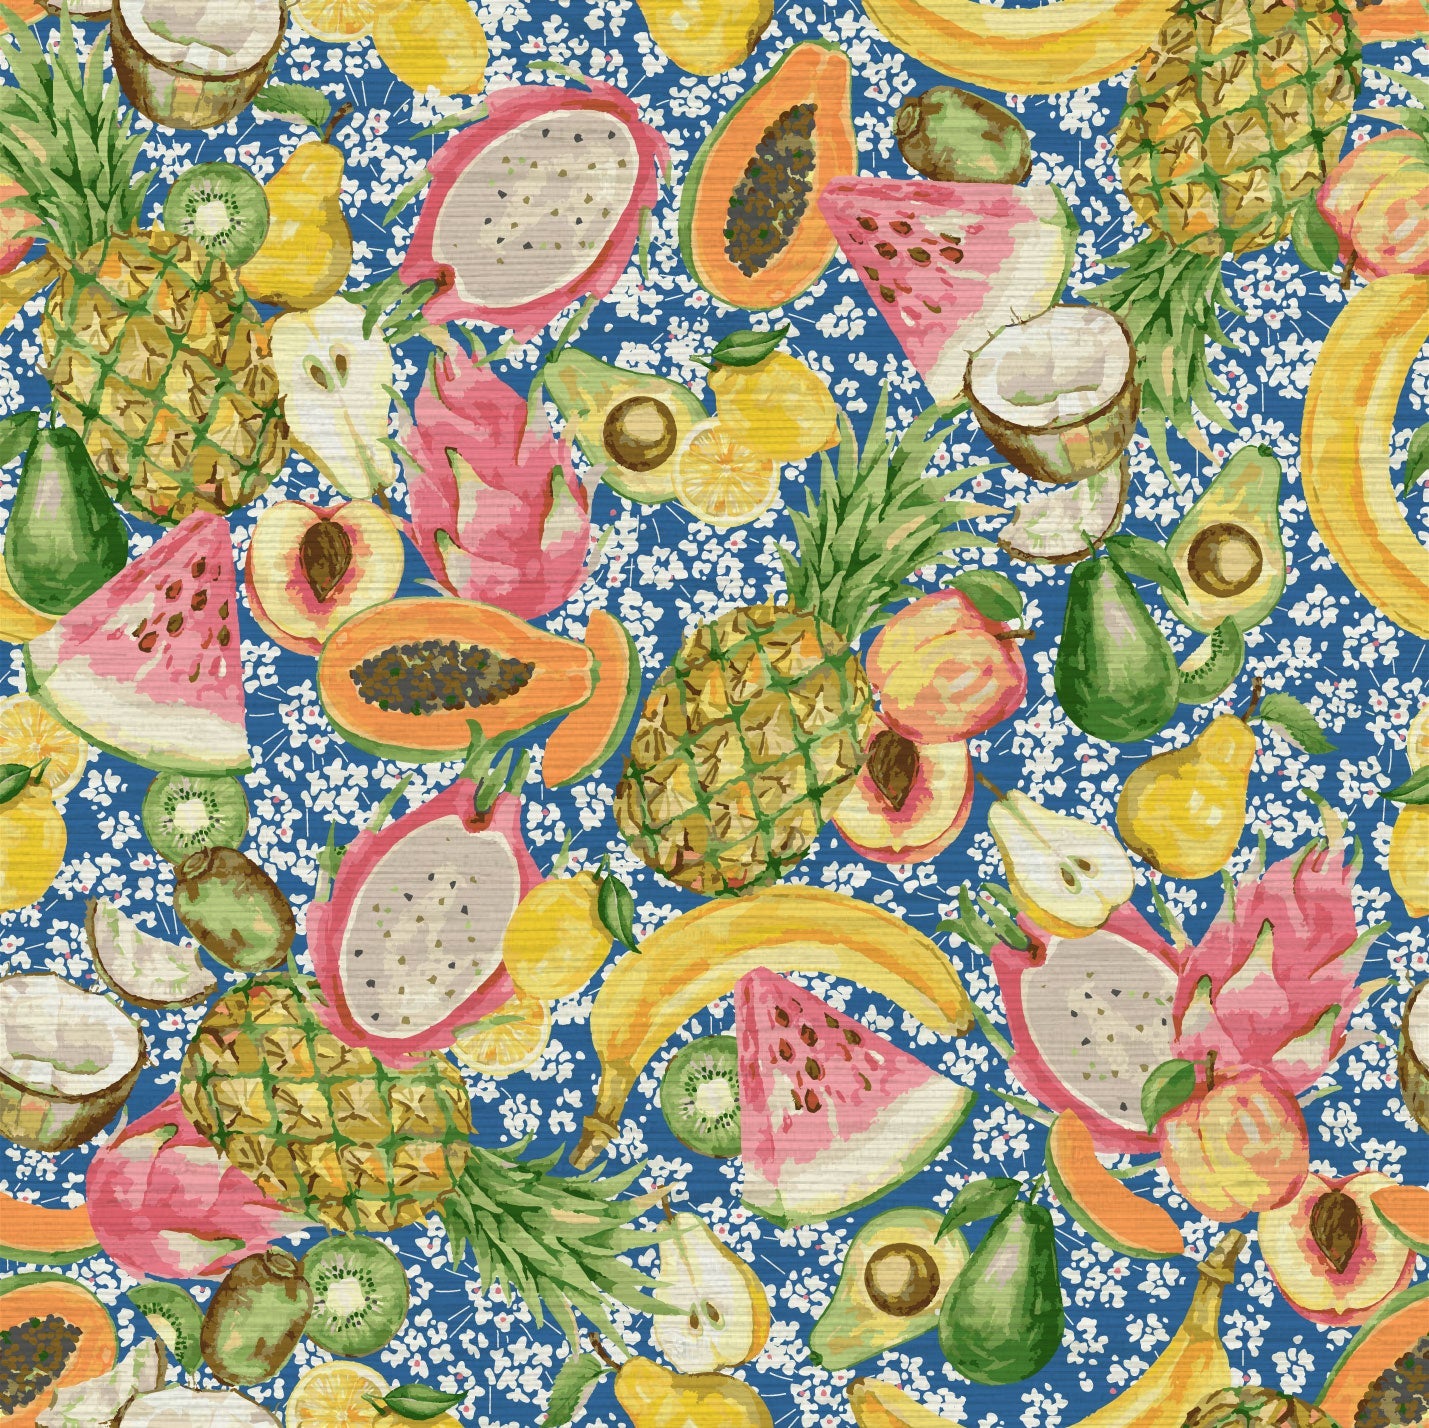 Load image into Gallery viewer, grasscloth wallpaper hand painted with watercolors, blue based print with white ditsy florals with tossed fruit layered on top including: pineapples, limes, bananas, avocados, lemons, pears, peaches, watermelon, coconuts, mangos, bananas passion fruit Natural Textured Eco-Friendly Non-toxic High-quality Sustainable practices Sustainability Interior Design Wall covering Bold tropical retro chic garden
